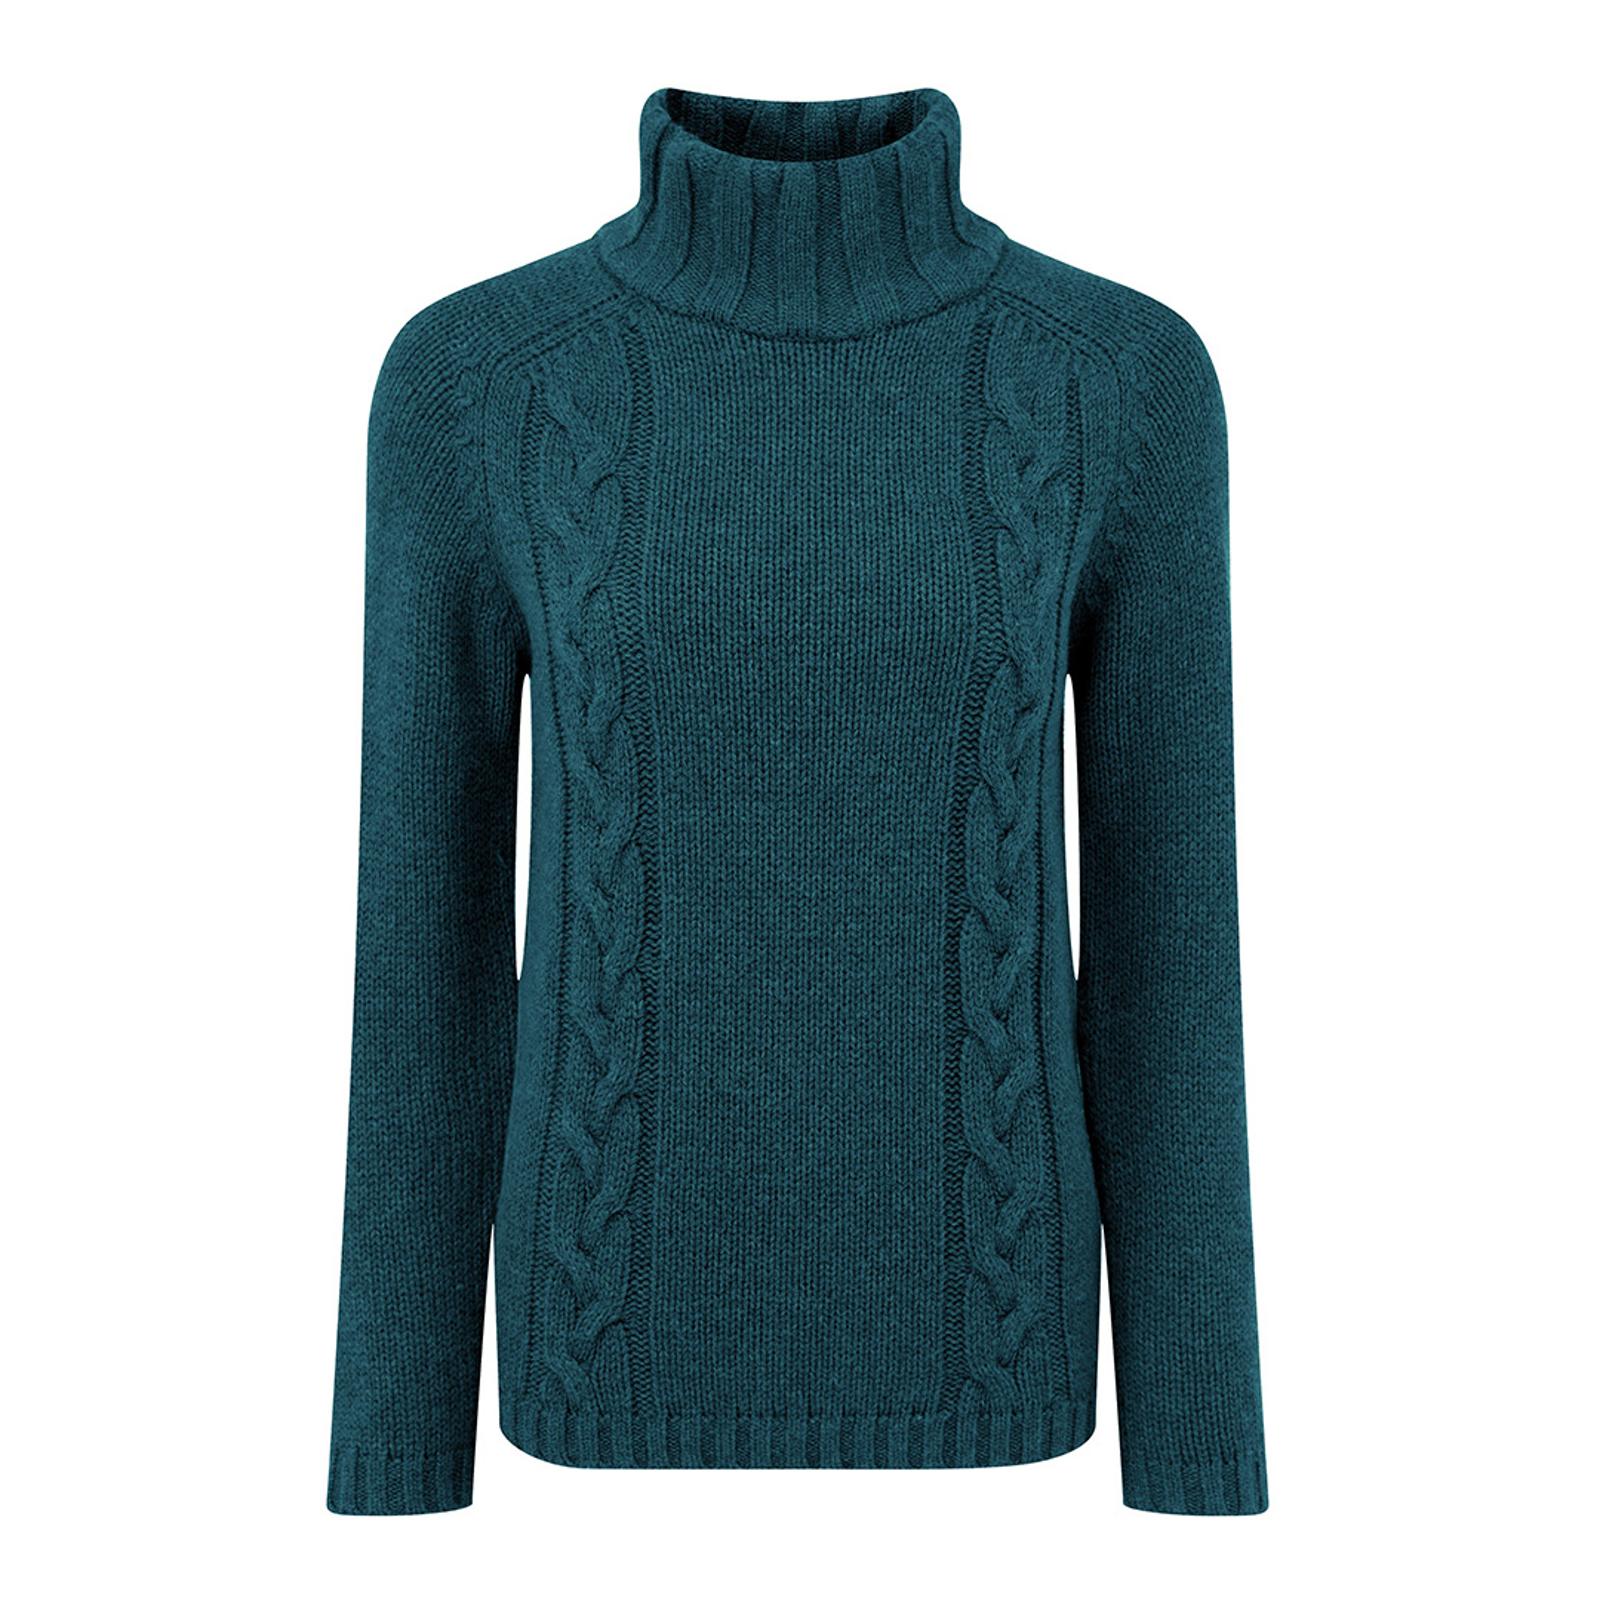 Teal Roll Neck Cable Knit Merino Wool Jumper - BrandAlley